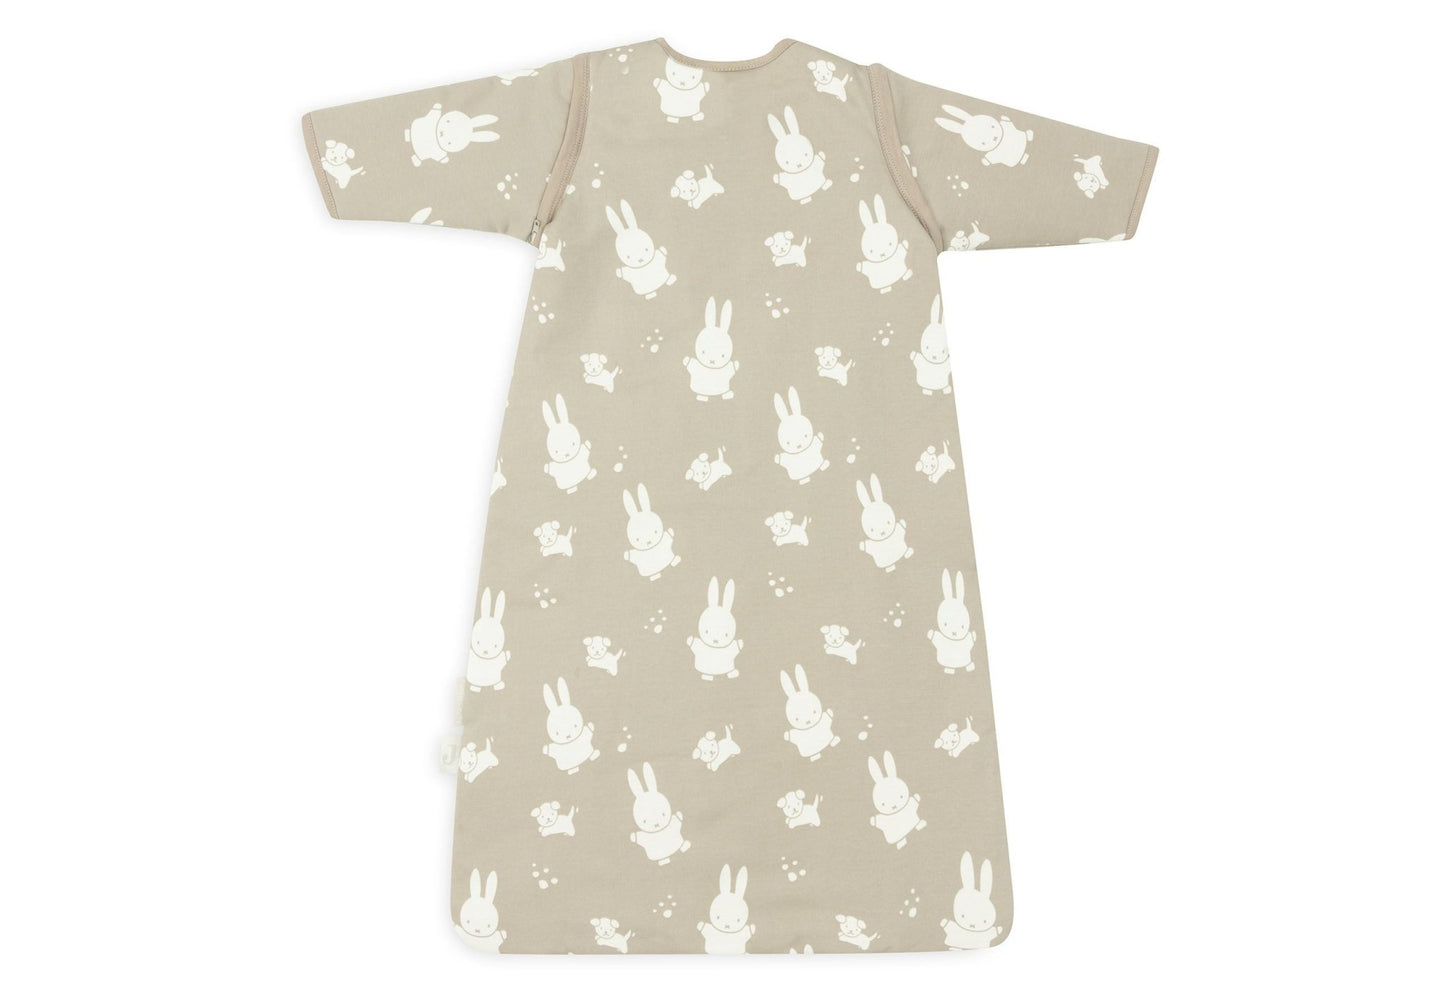 Gigoteuse avec Manches Amovibles Miffy - Olive Green - 6/18 mois - Lina et Compagnie